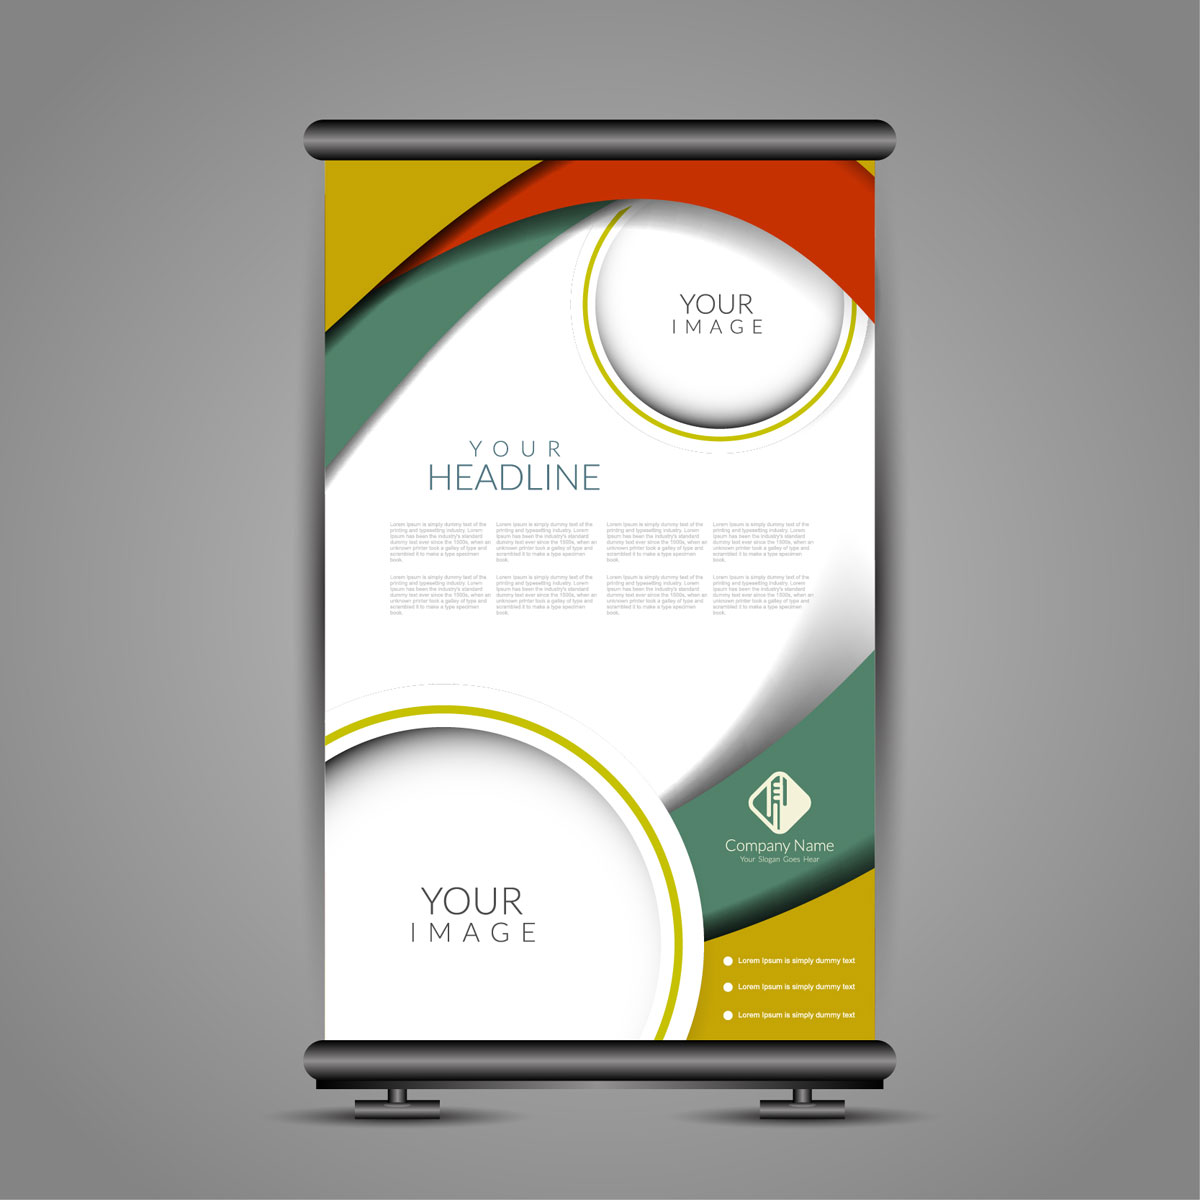 Professional Printing Services: Roll-Up Printing in Abu Dhabi